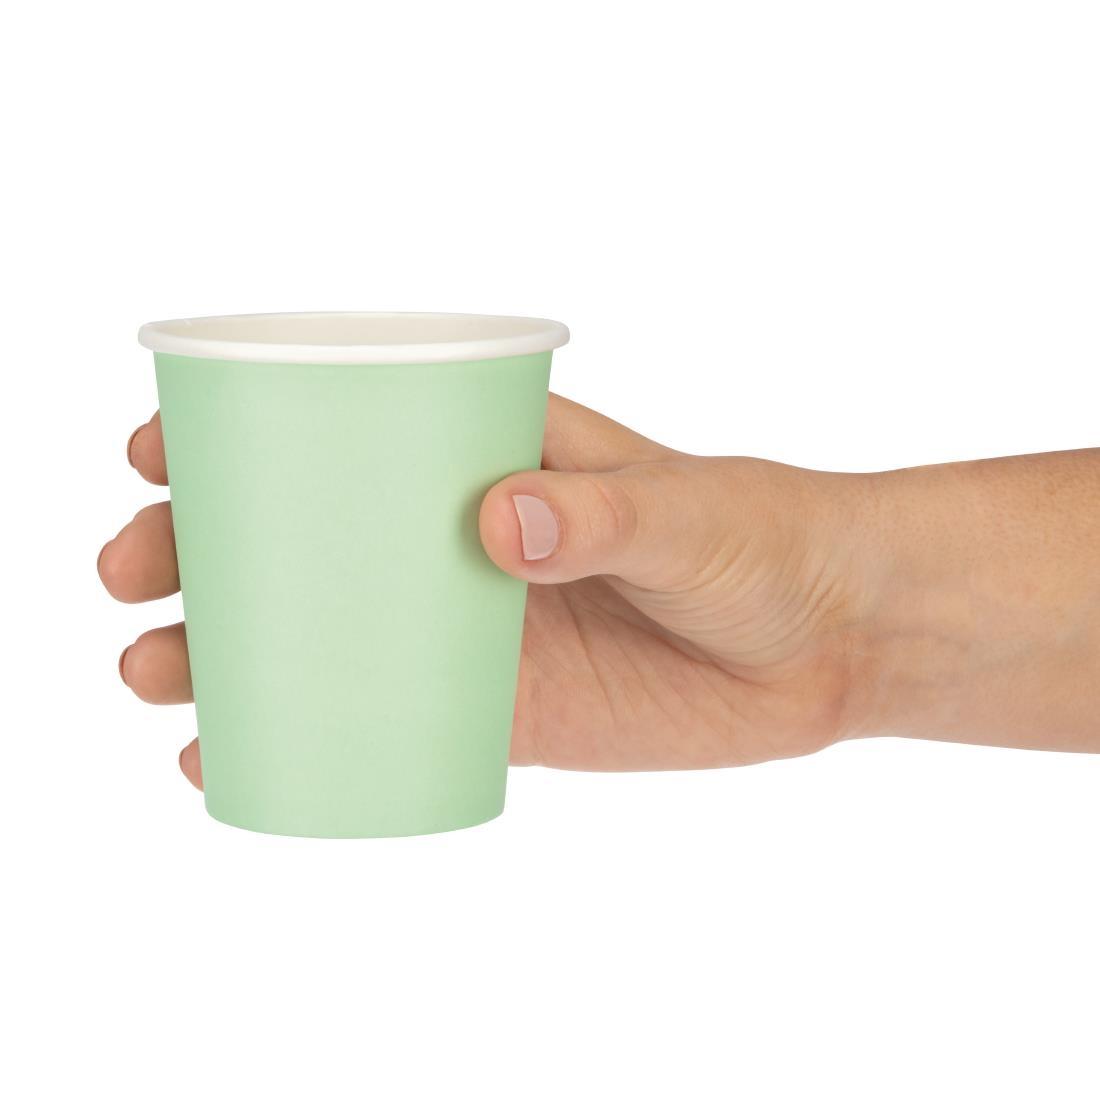 Fiesta Recyclable Coffee Cups Single Wall Turquoise 225ml / 8oz (Pack of 1000) - GP403  - 4